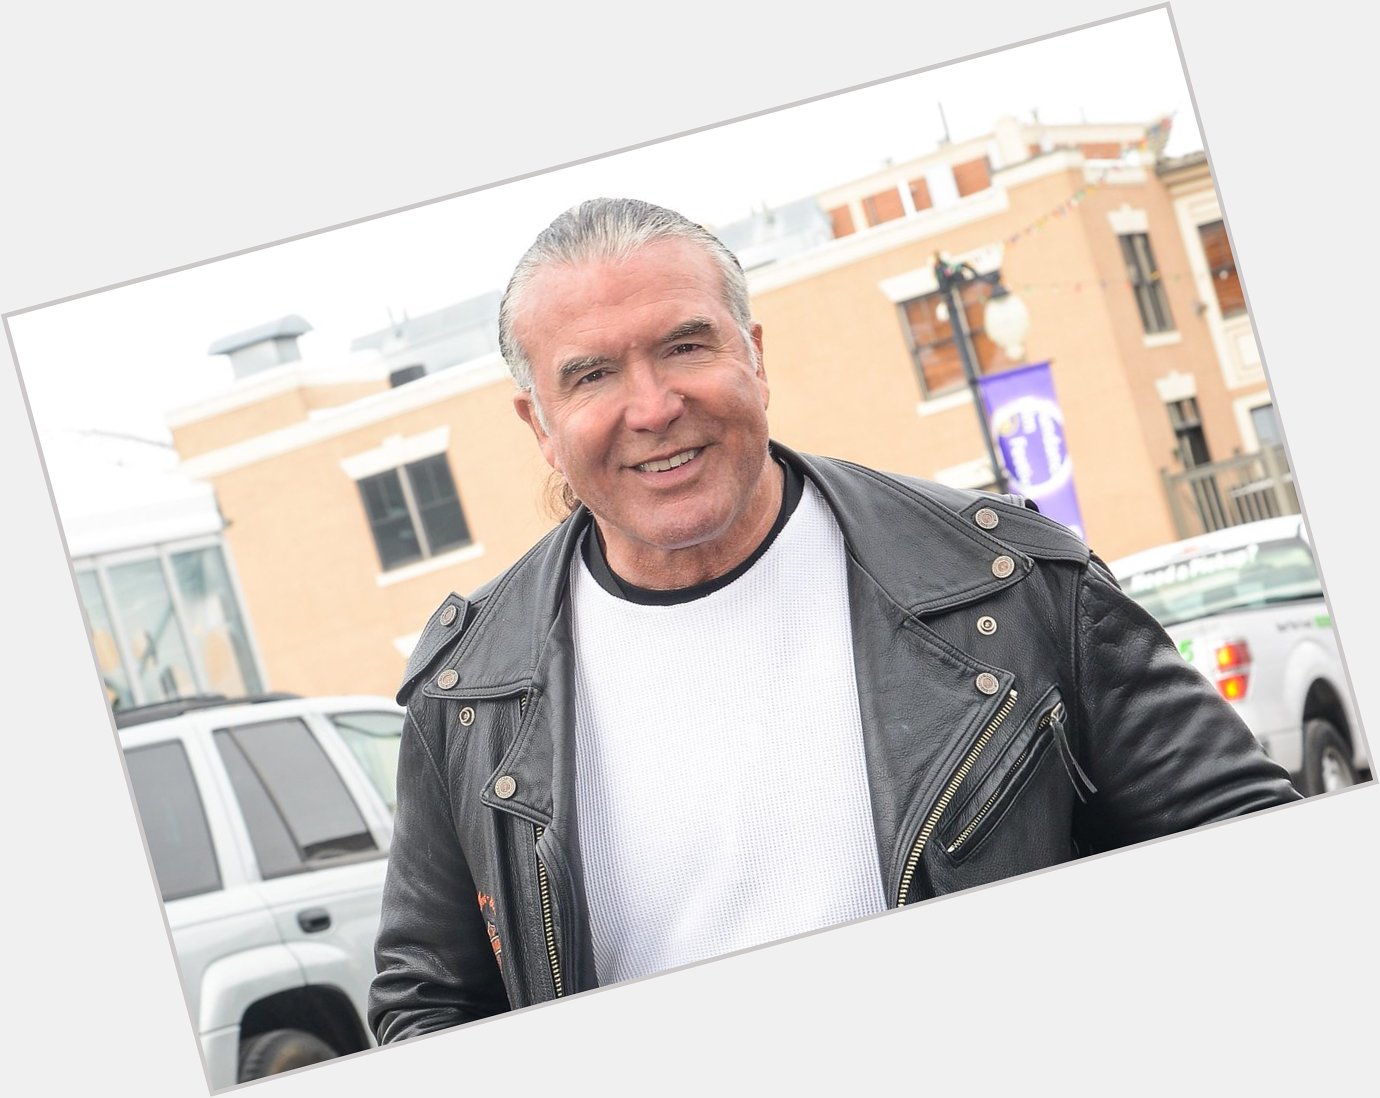 Happy Birthday to WWE Hall of Famer Scott Hall who turns 60 today! 